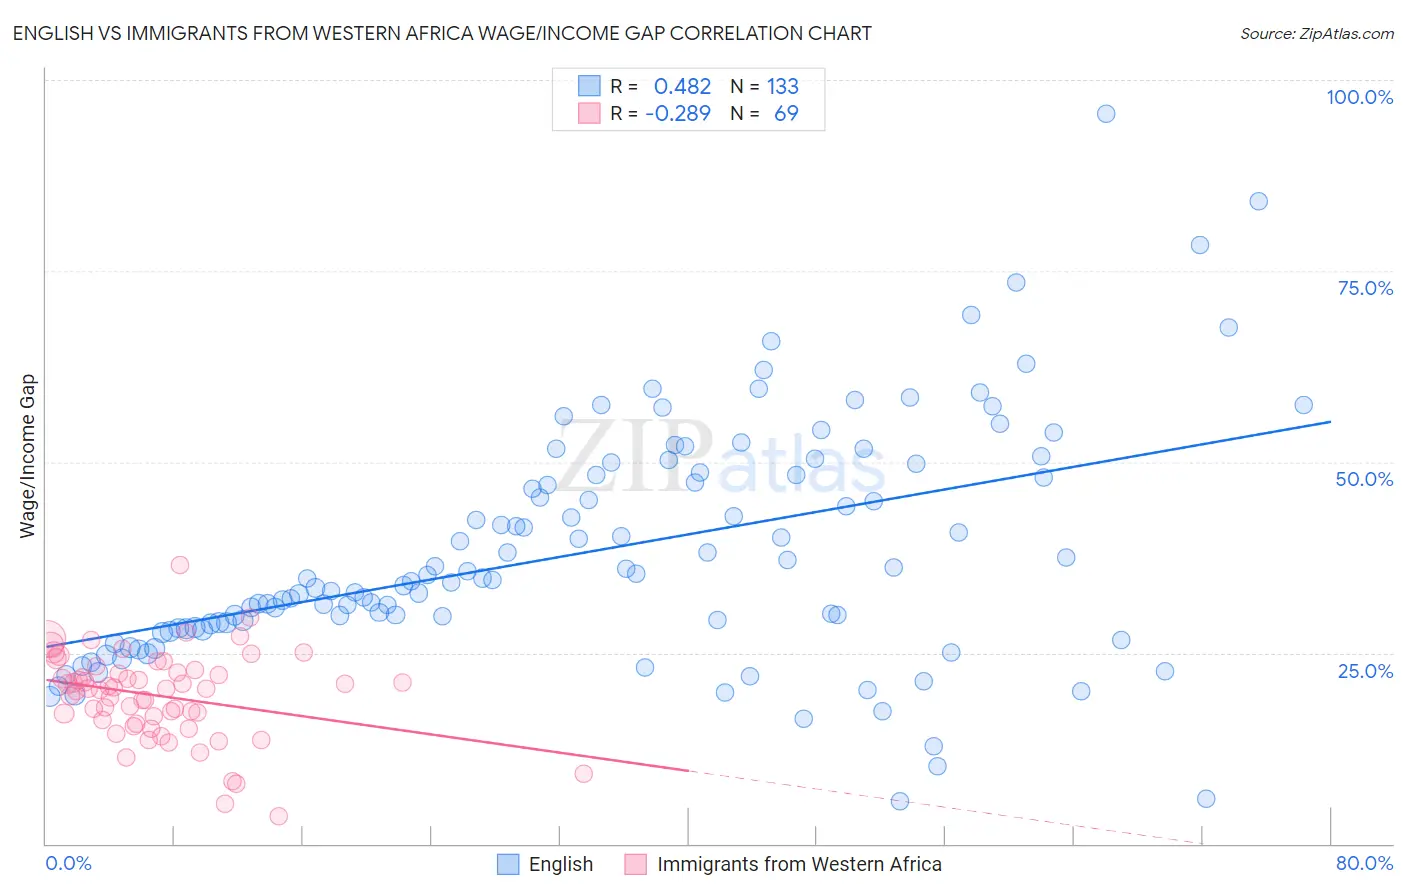 English vs Immigrants from Western Africa Wage/Income Gap